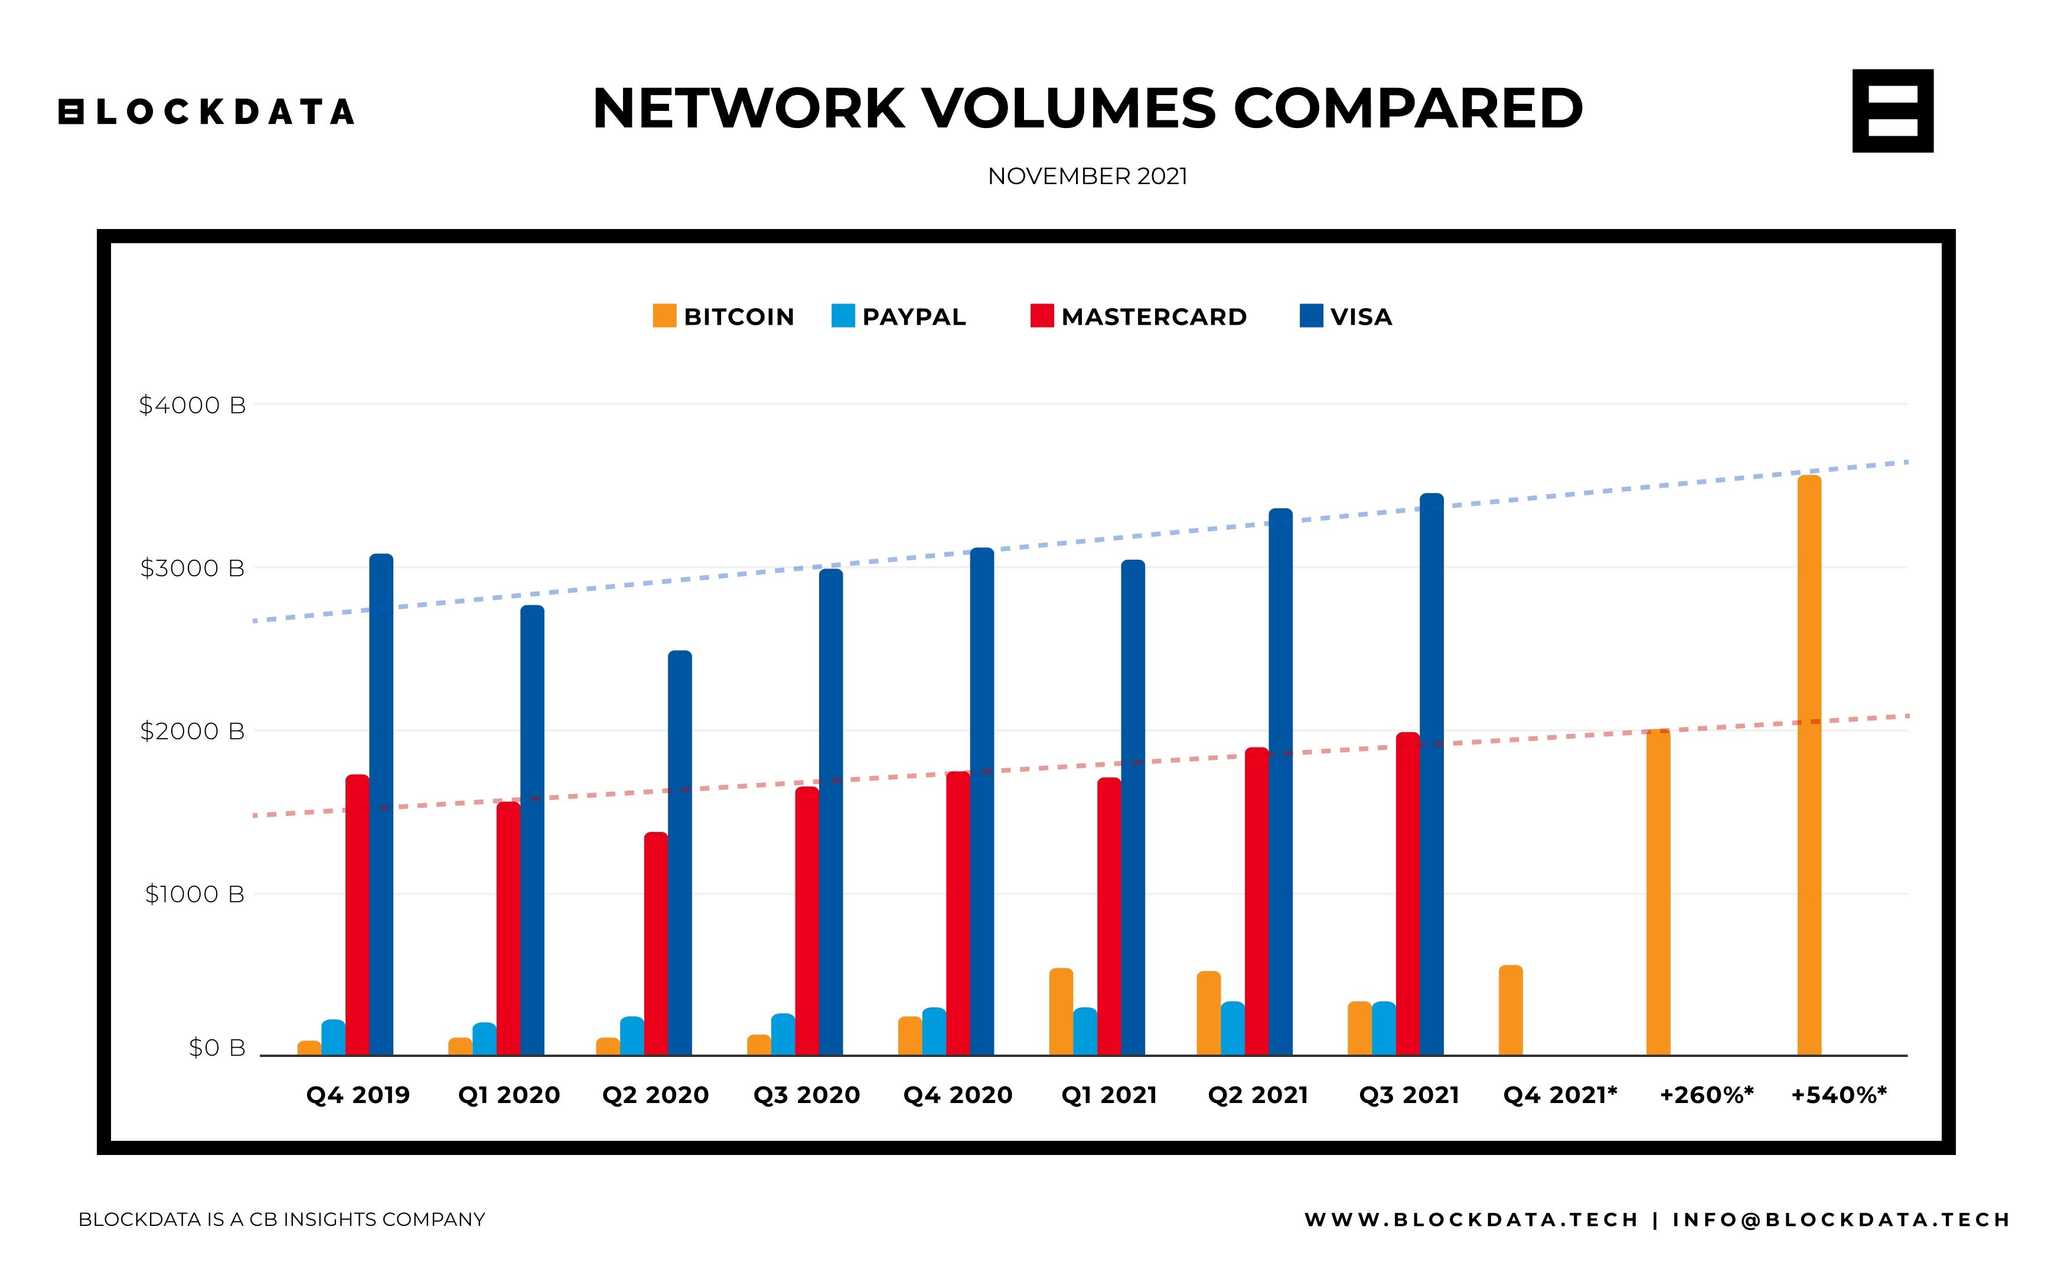 Network volumes compared